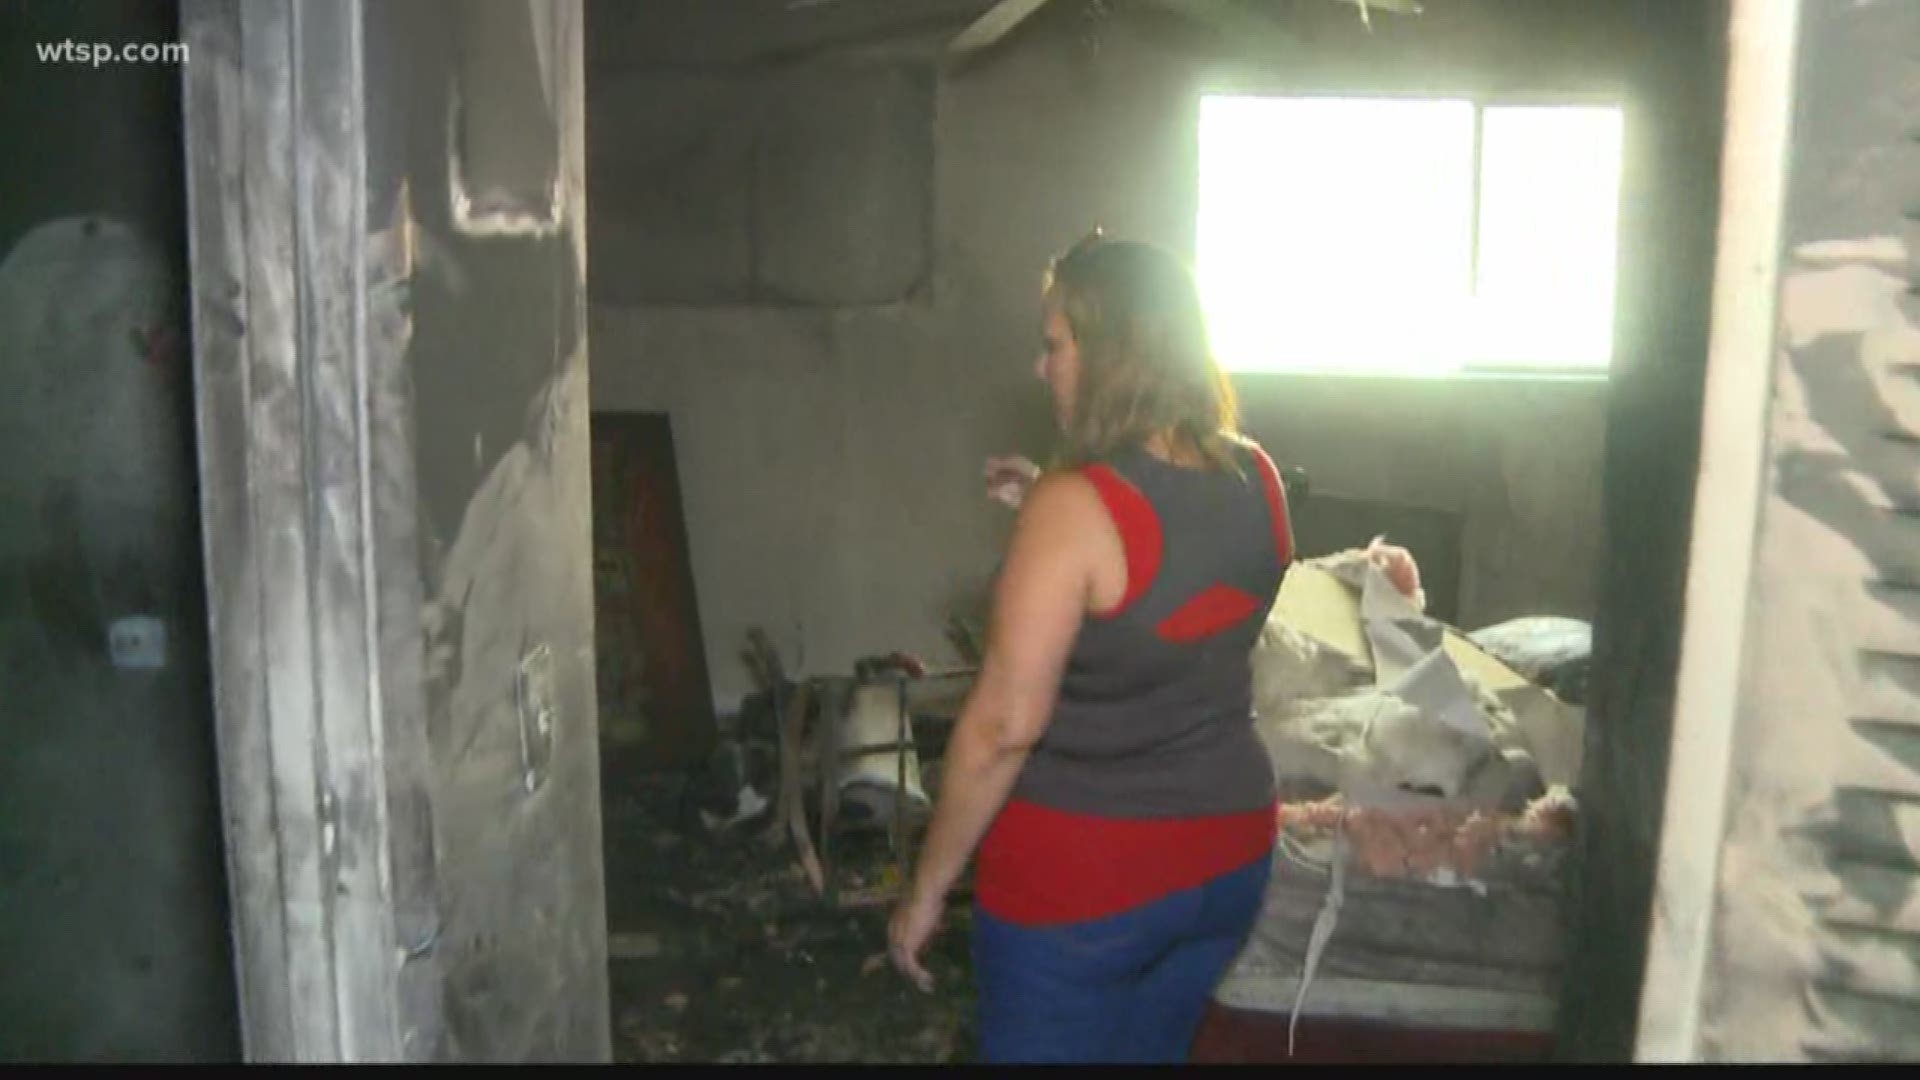 A Hillsborough County mom is searching for answers after her home went up in flames. Investigators believe an overheated cellphone could've sparked the fire in her unit. 

"I see it on TV all the time, and I'm like you think it would never happen to you. When it does, it's just like, oh my God," said Jaqueline Rodriguez. https://on.wtsp.com/2LZylz0